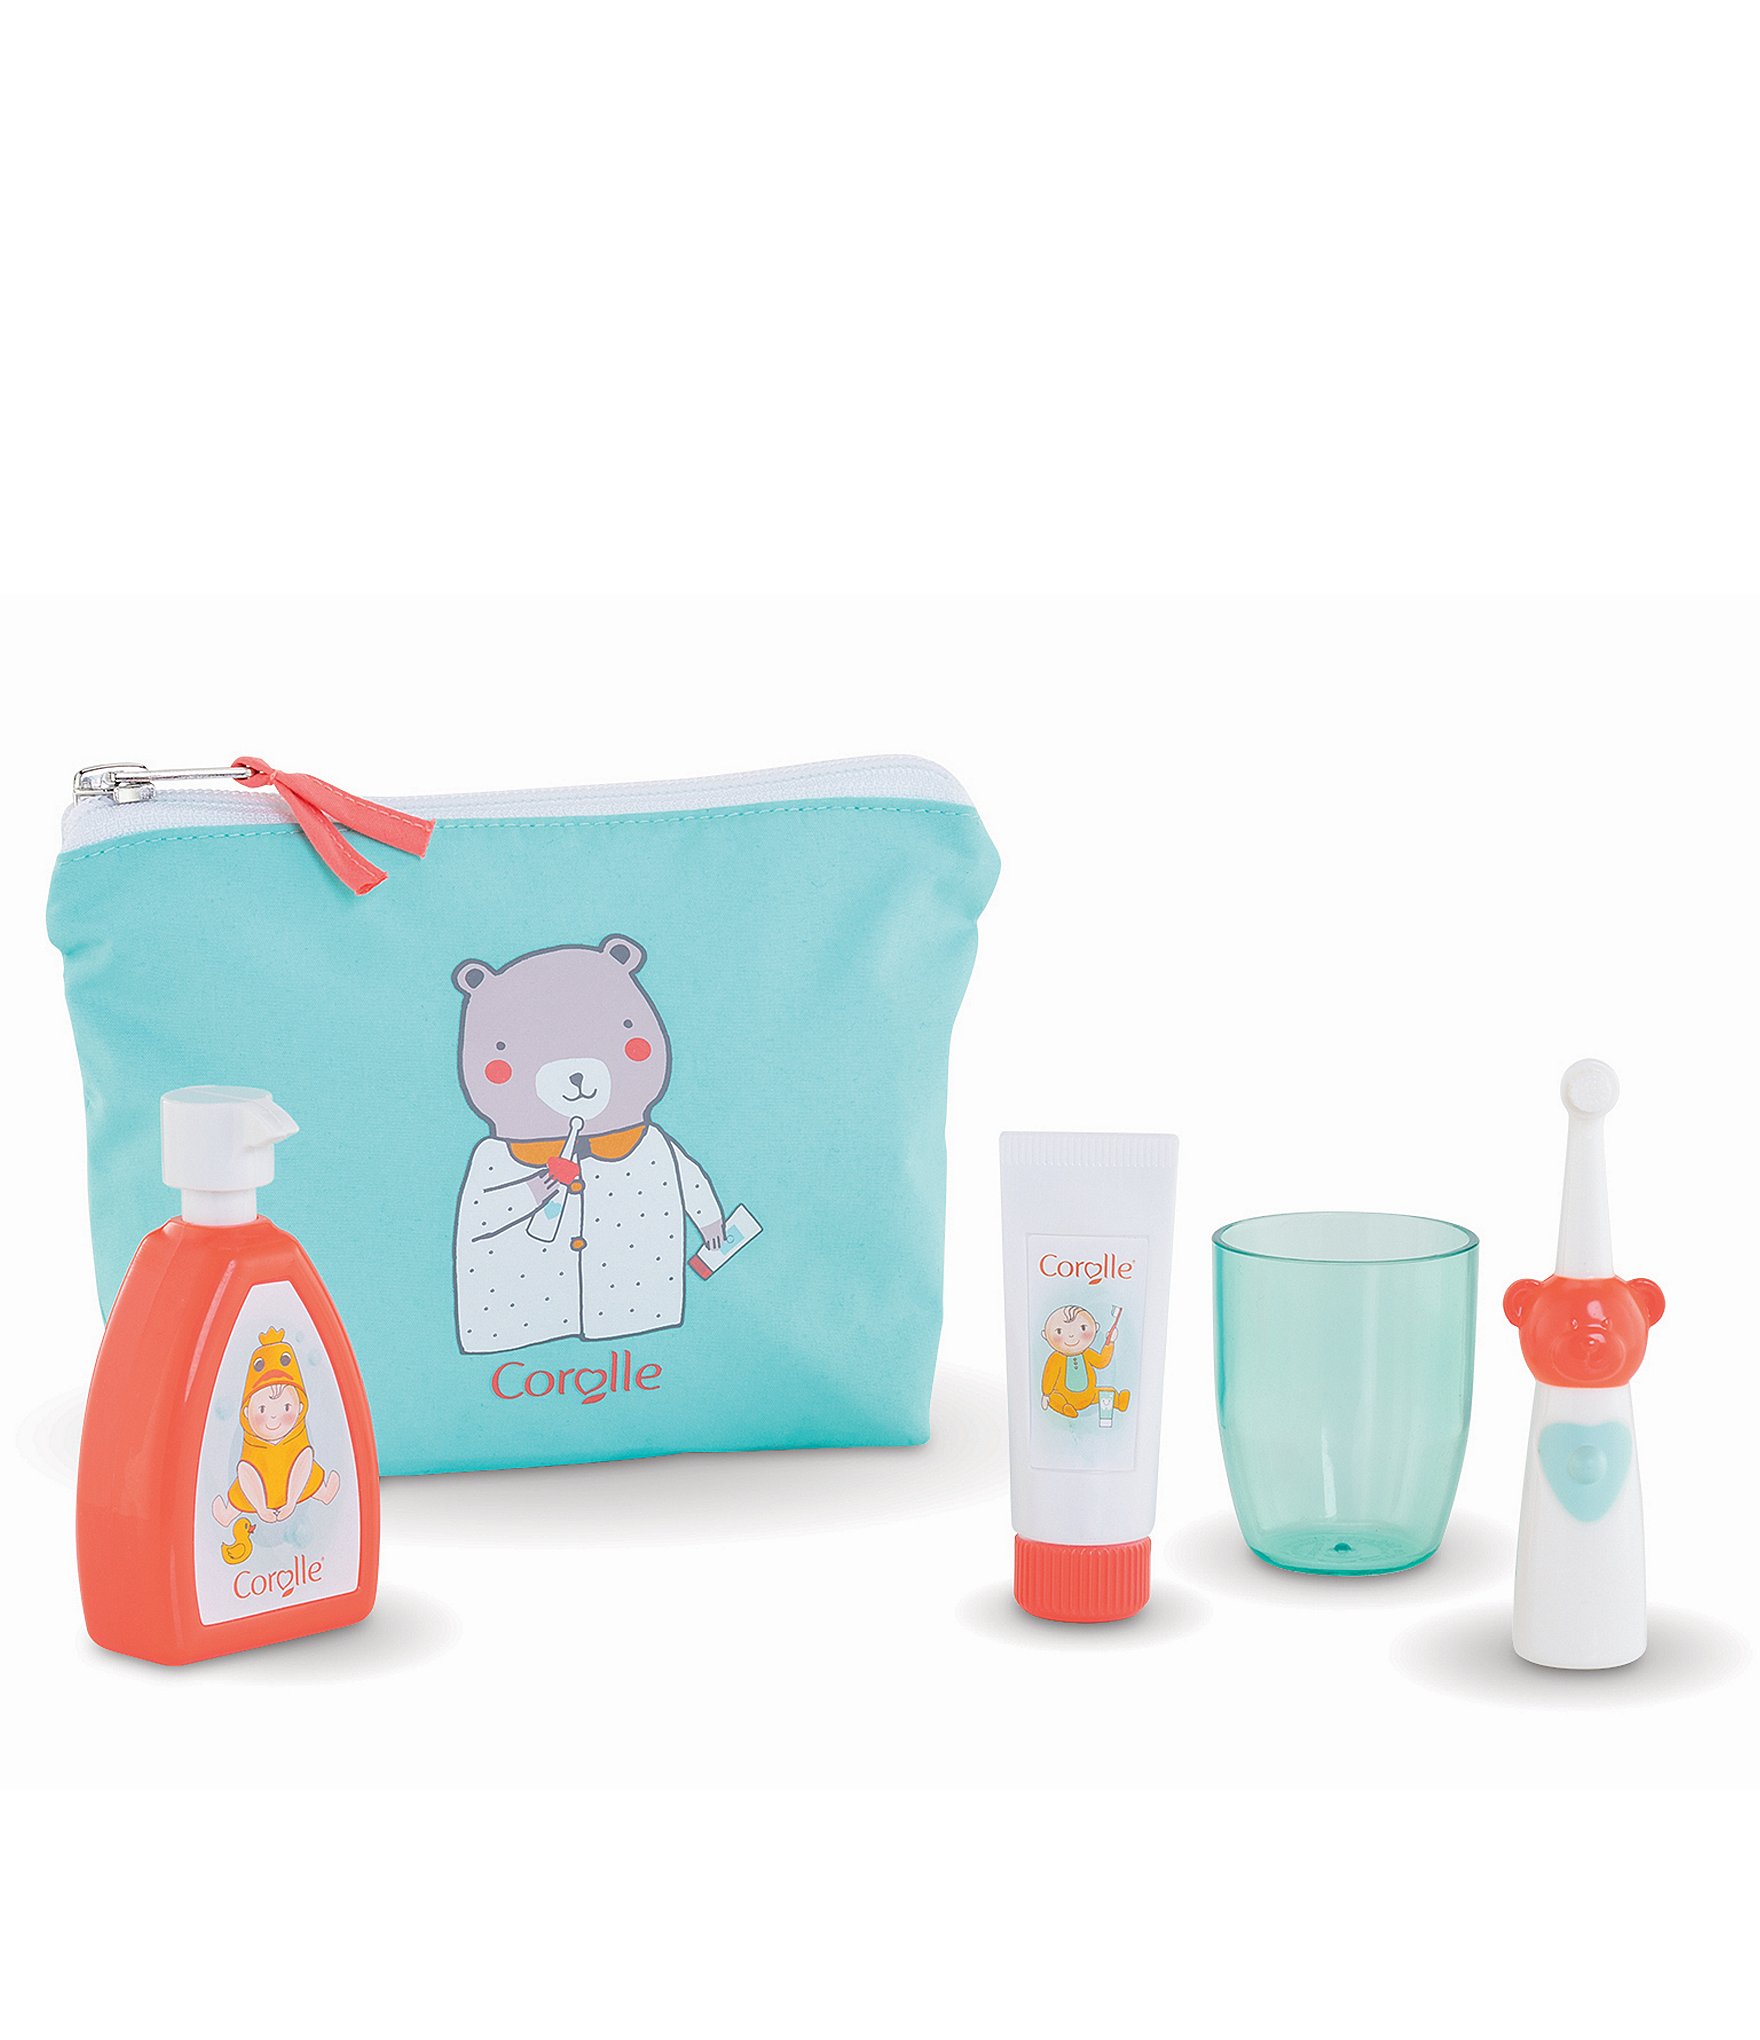 Henfald dug Gæsterne Corolle Dolls Doll Care Pouch and Accessories Set for Baby Dolls | Dillard's